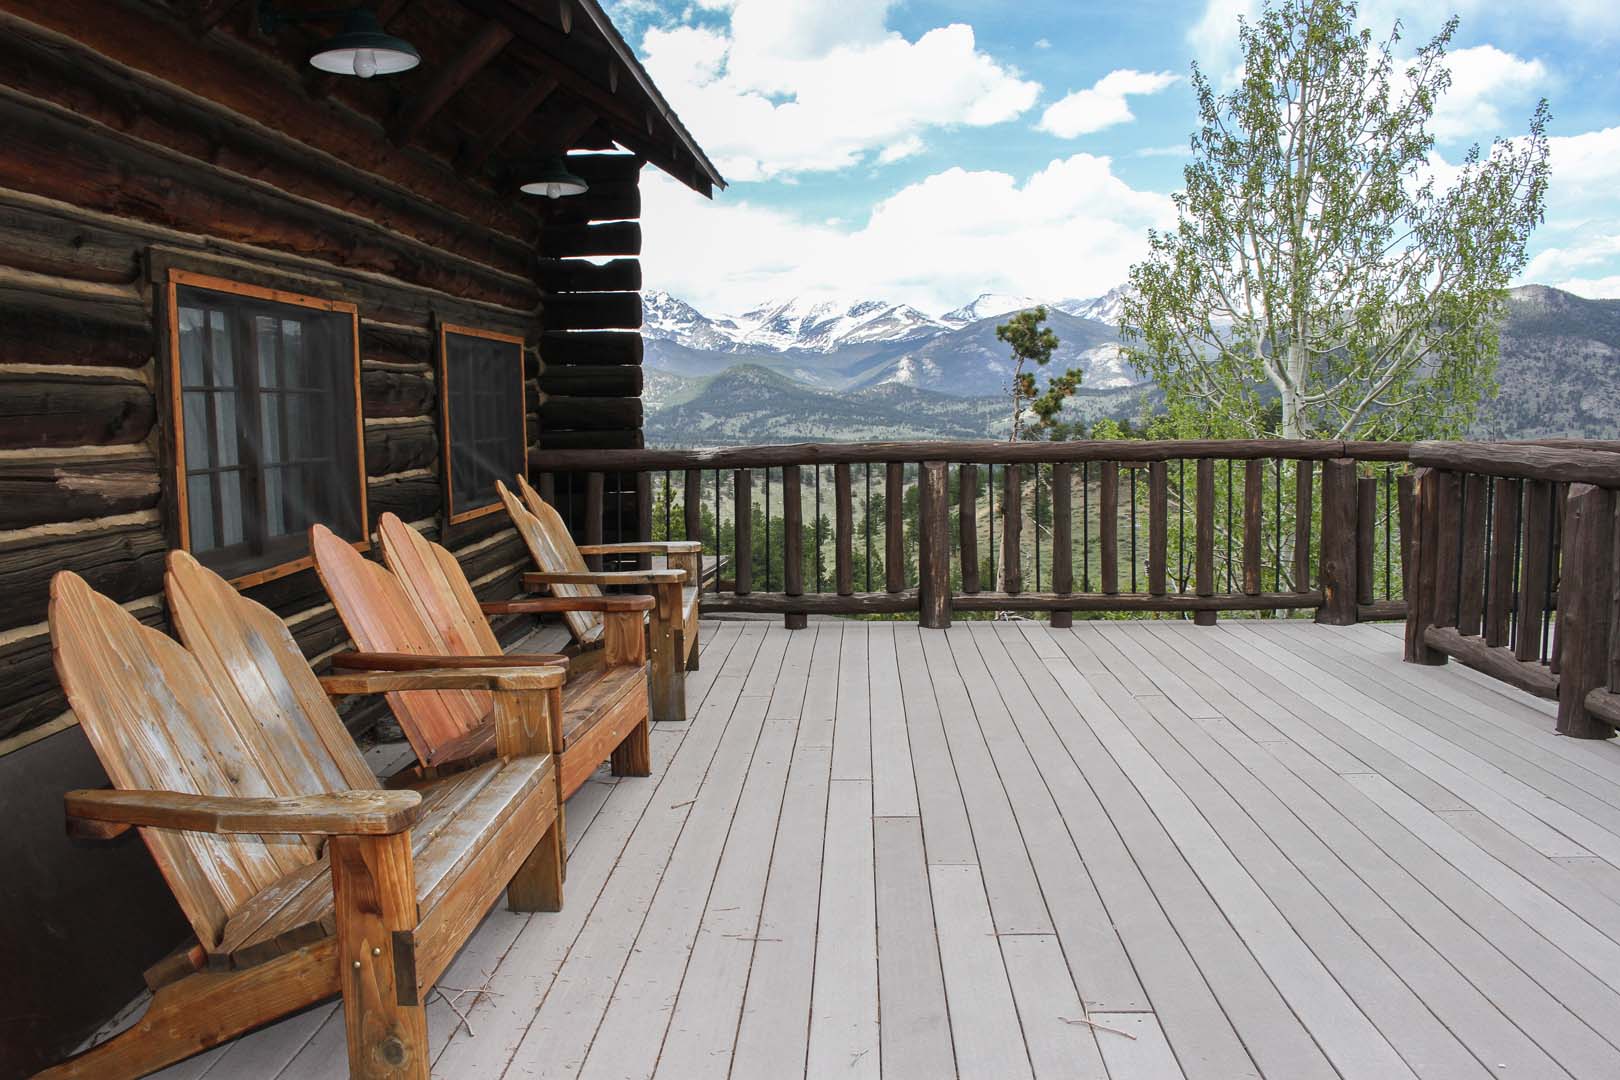 Patio with outdoor chairs and view of mountains